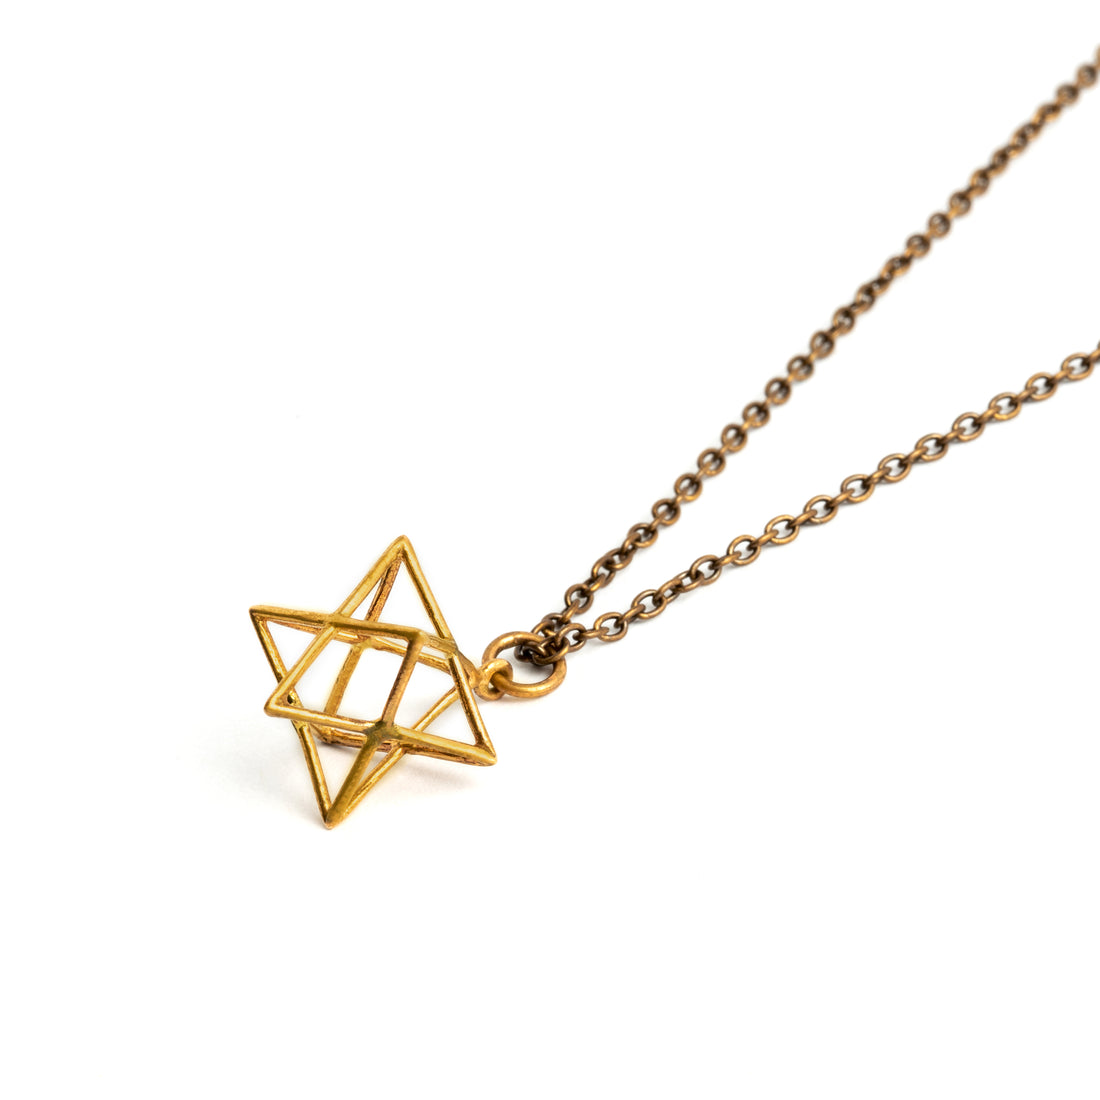 Bronze Wire Merkaba charm pendant necklace right side view